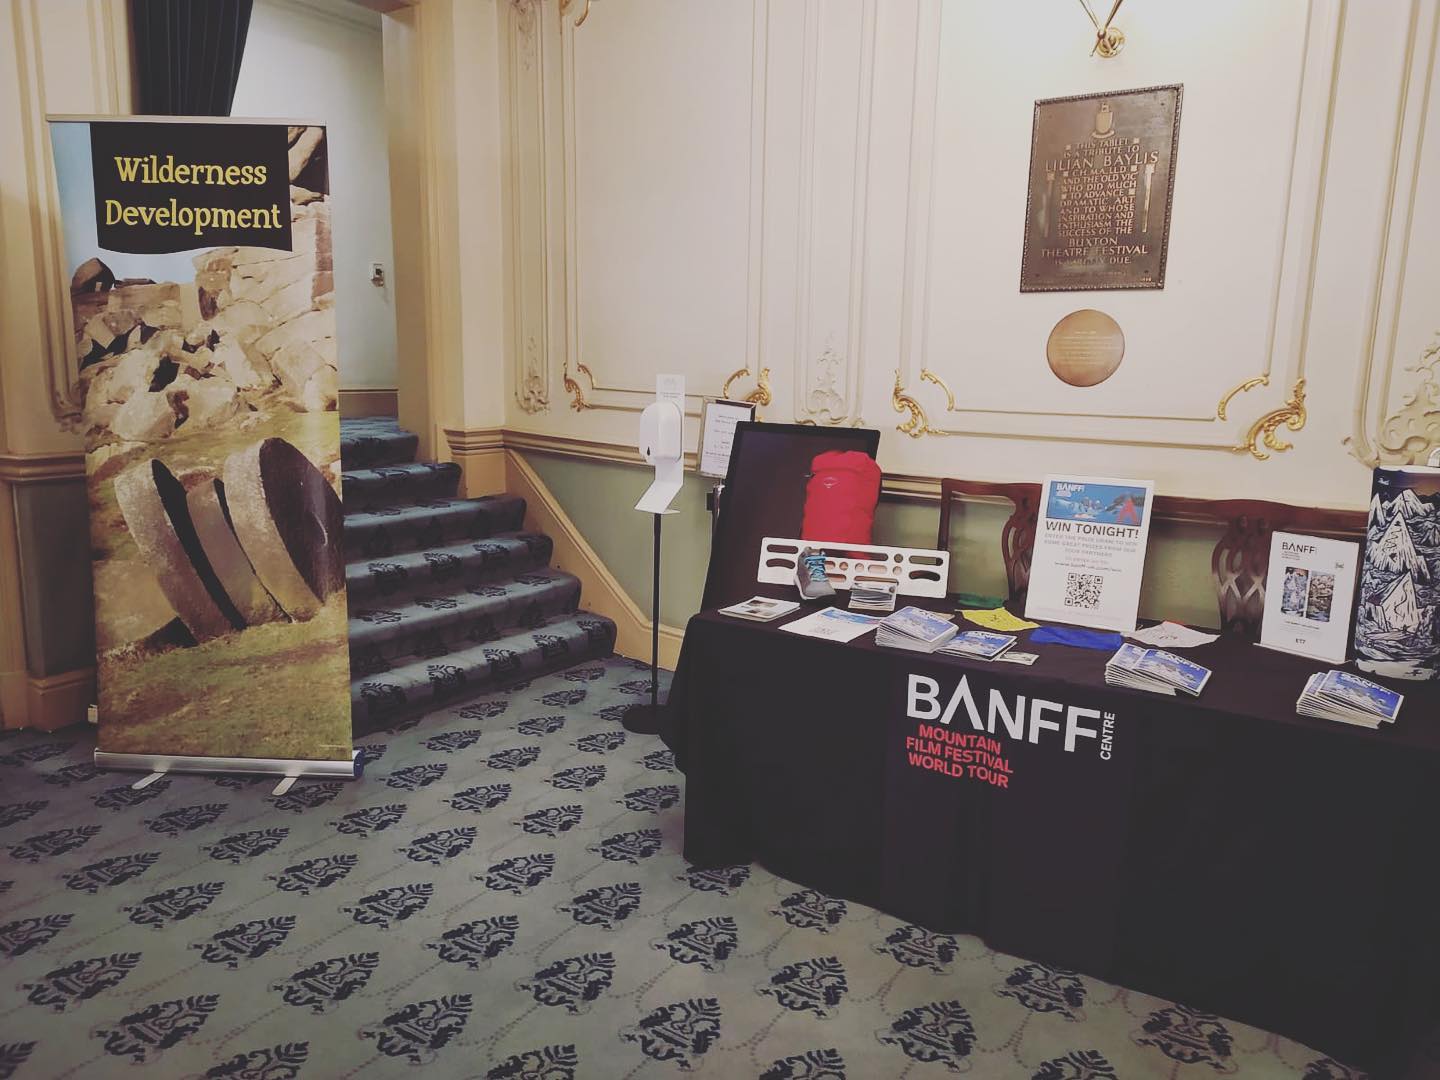 We had a great night at the @ukbanfffilmfest last night. It was so good to see so many people coming together to watch the great set of short films which had been put together. A massive congratulations as well to Oli Hibbs who won a Wilderness Development adventure prize - we look forward to seeing you soon ⛰🥾⛰
.
.
.
#banfffilmfestival #banffuktour #wildernessdevelopment